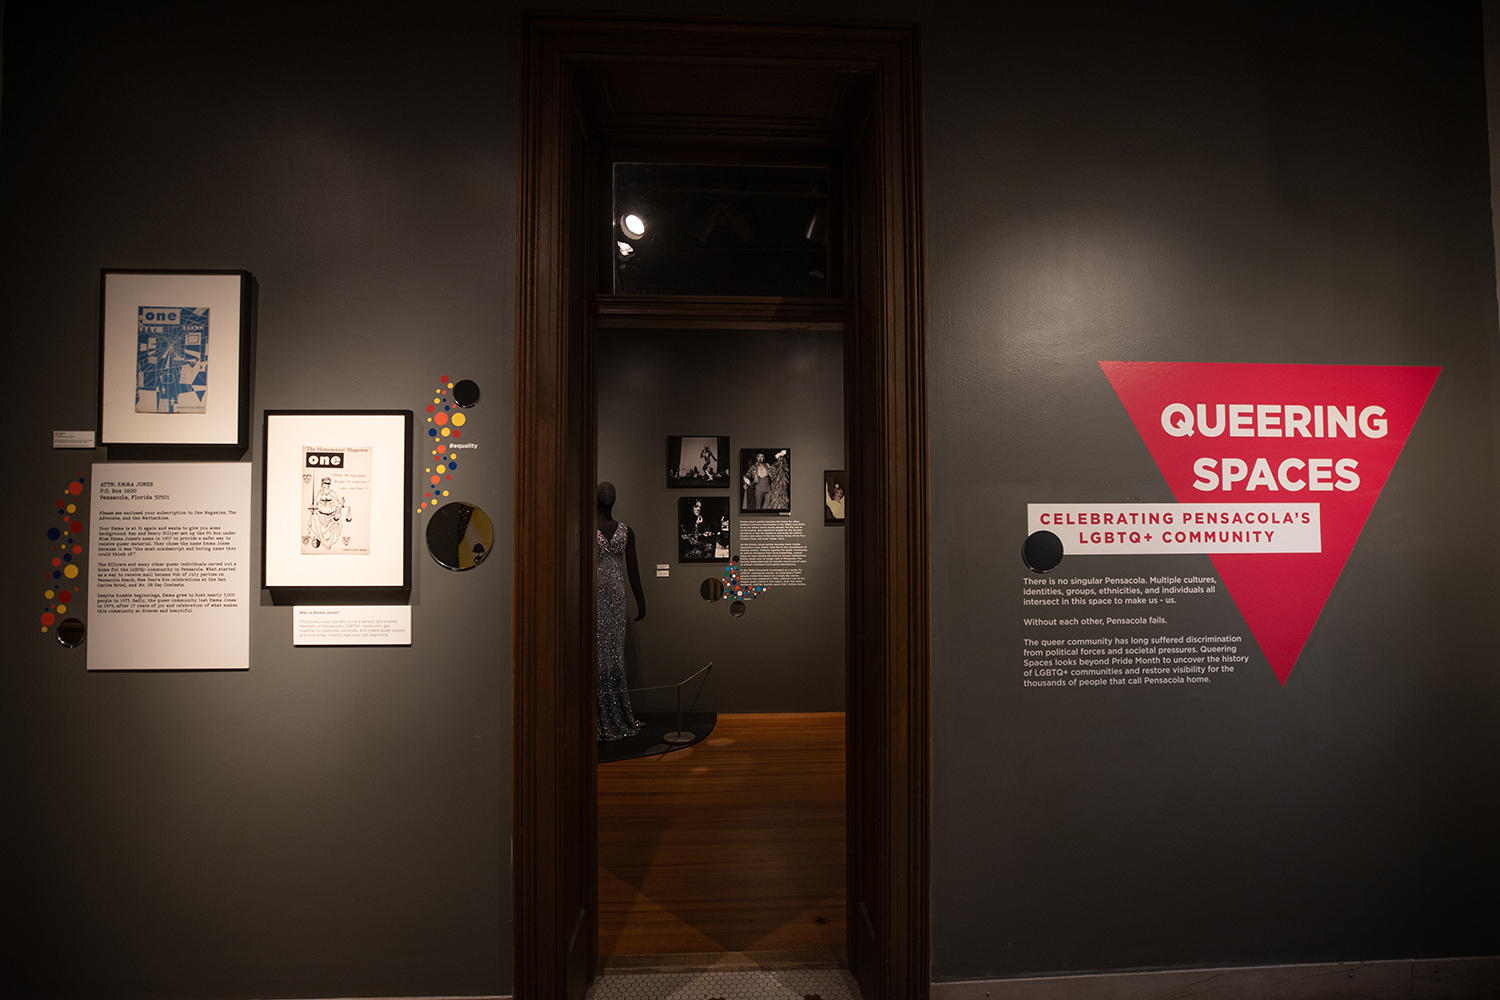 "Queering Spaces" is an exhibit that celebrates the history and current culture of the LGBTQ+ community in the city of Pensacola. The exhibit is displayed in the T.T. Wentworth Museum in downtown Pensacola.